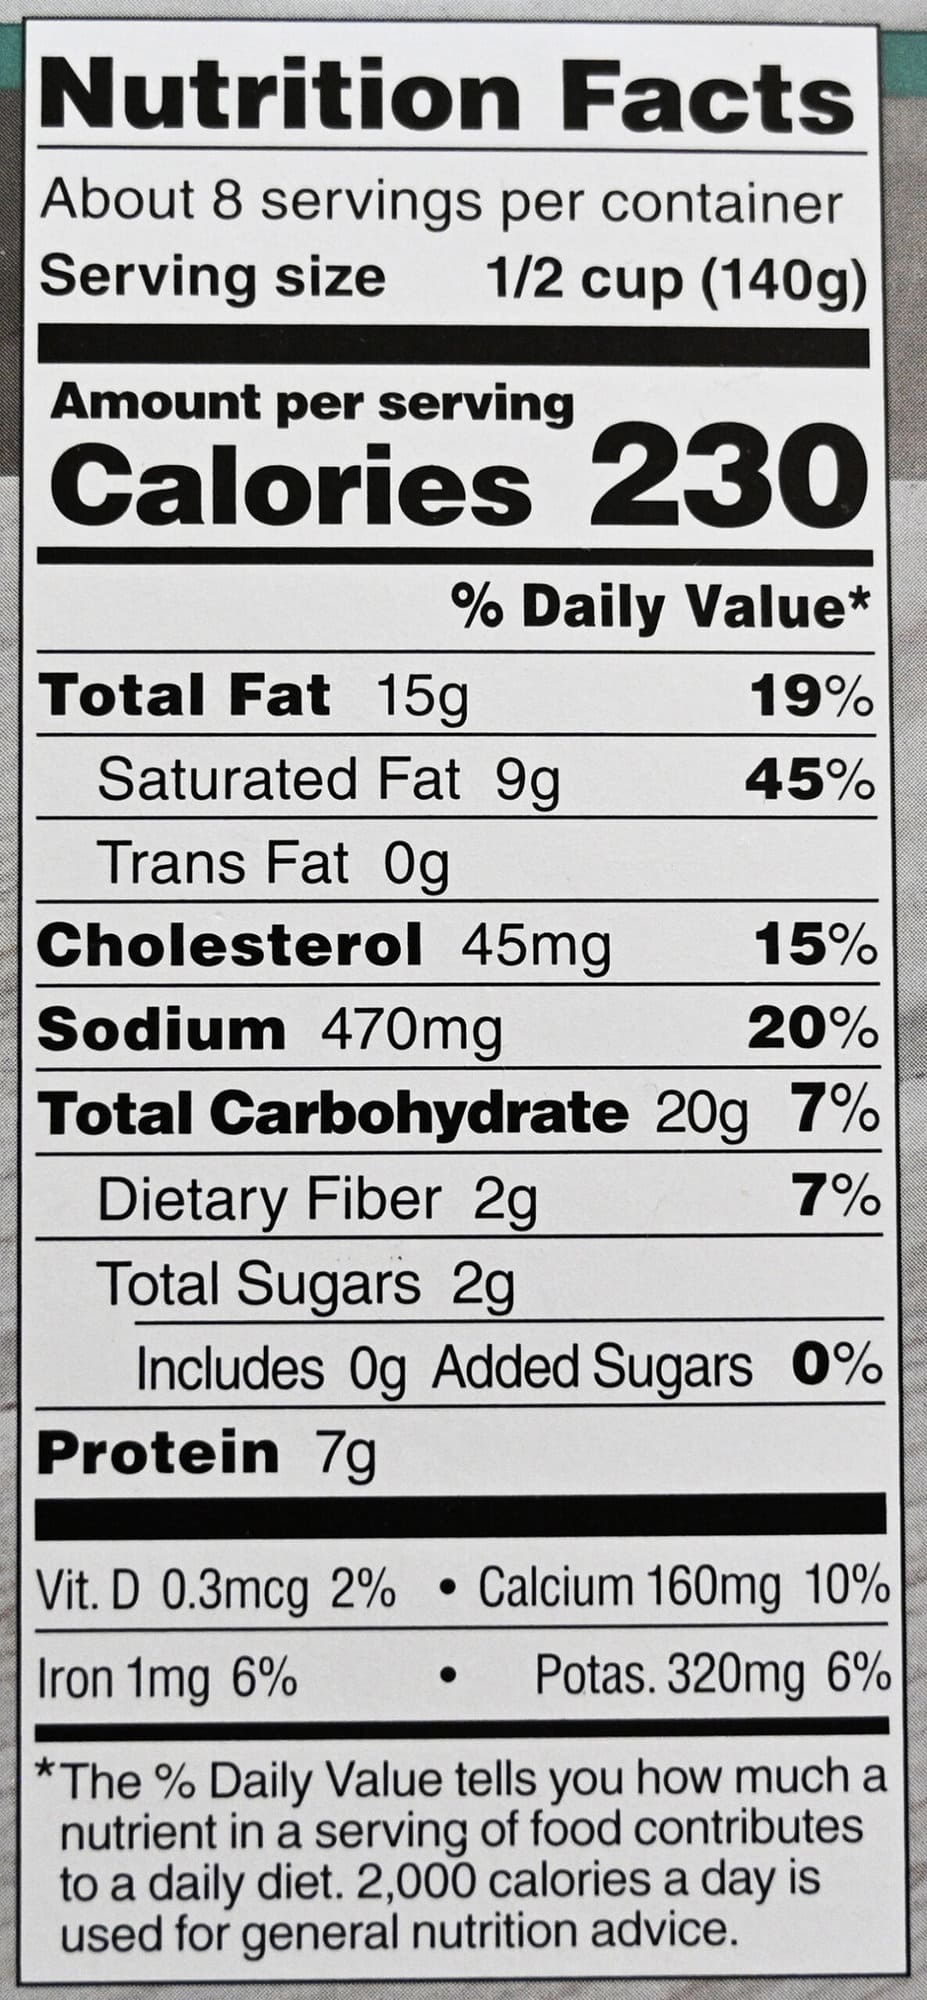 Image of the nutrition facts for the scalloped potatoes from the back of the package.